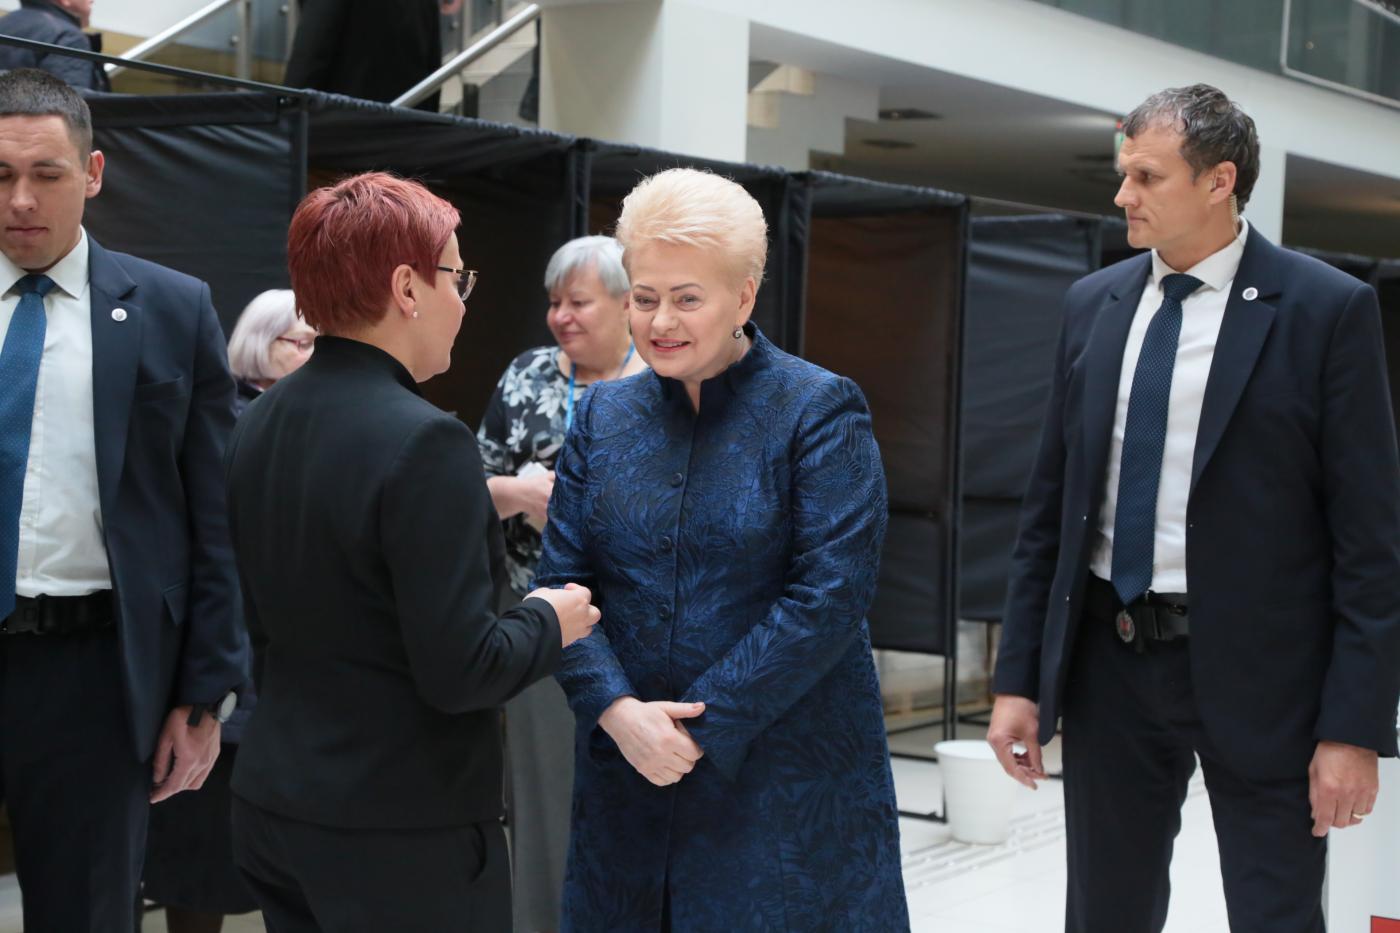 VILNIUS, May 7, 2019 (Xinhua) -- Lithuanian President Dalia Grybauskaite (2nd R) talks with a staff member of the polling station after casting her vote in the presidential elections and the dual citizenship referendum in Vilnius, Lithuania, May 7, 2019. Advance voting kicked off on Monday in the Lithuanian presidential elections and referendums on dual citizenship and the number of parliament members. For the first time in Lithuania, the advance voting is held for five days. (Xinhua/Guo Mingfang/IANS) by .